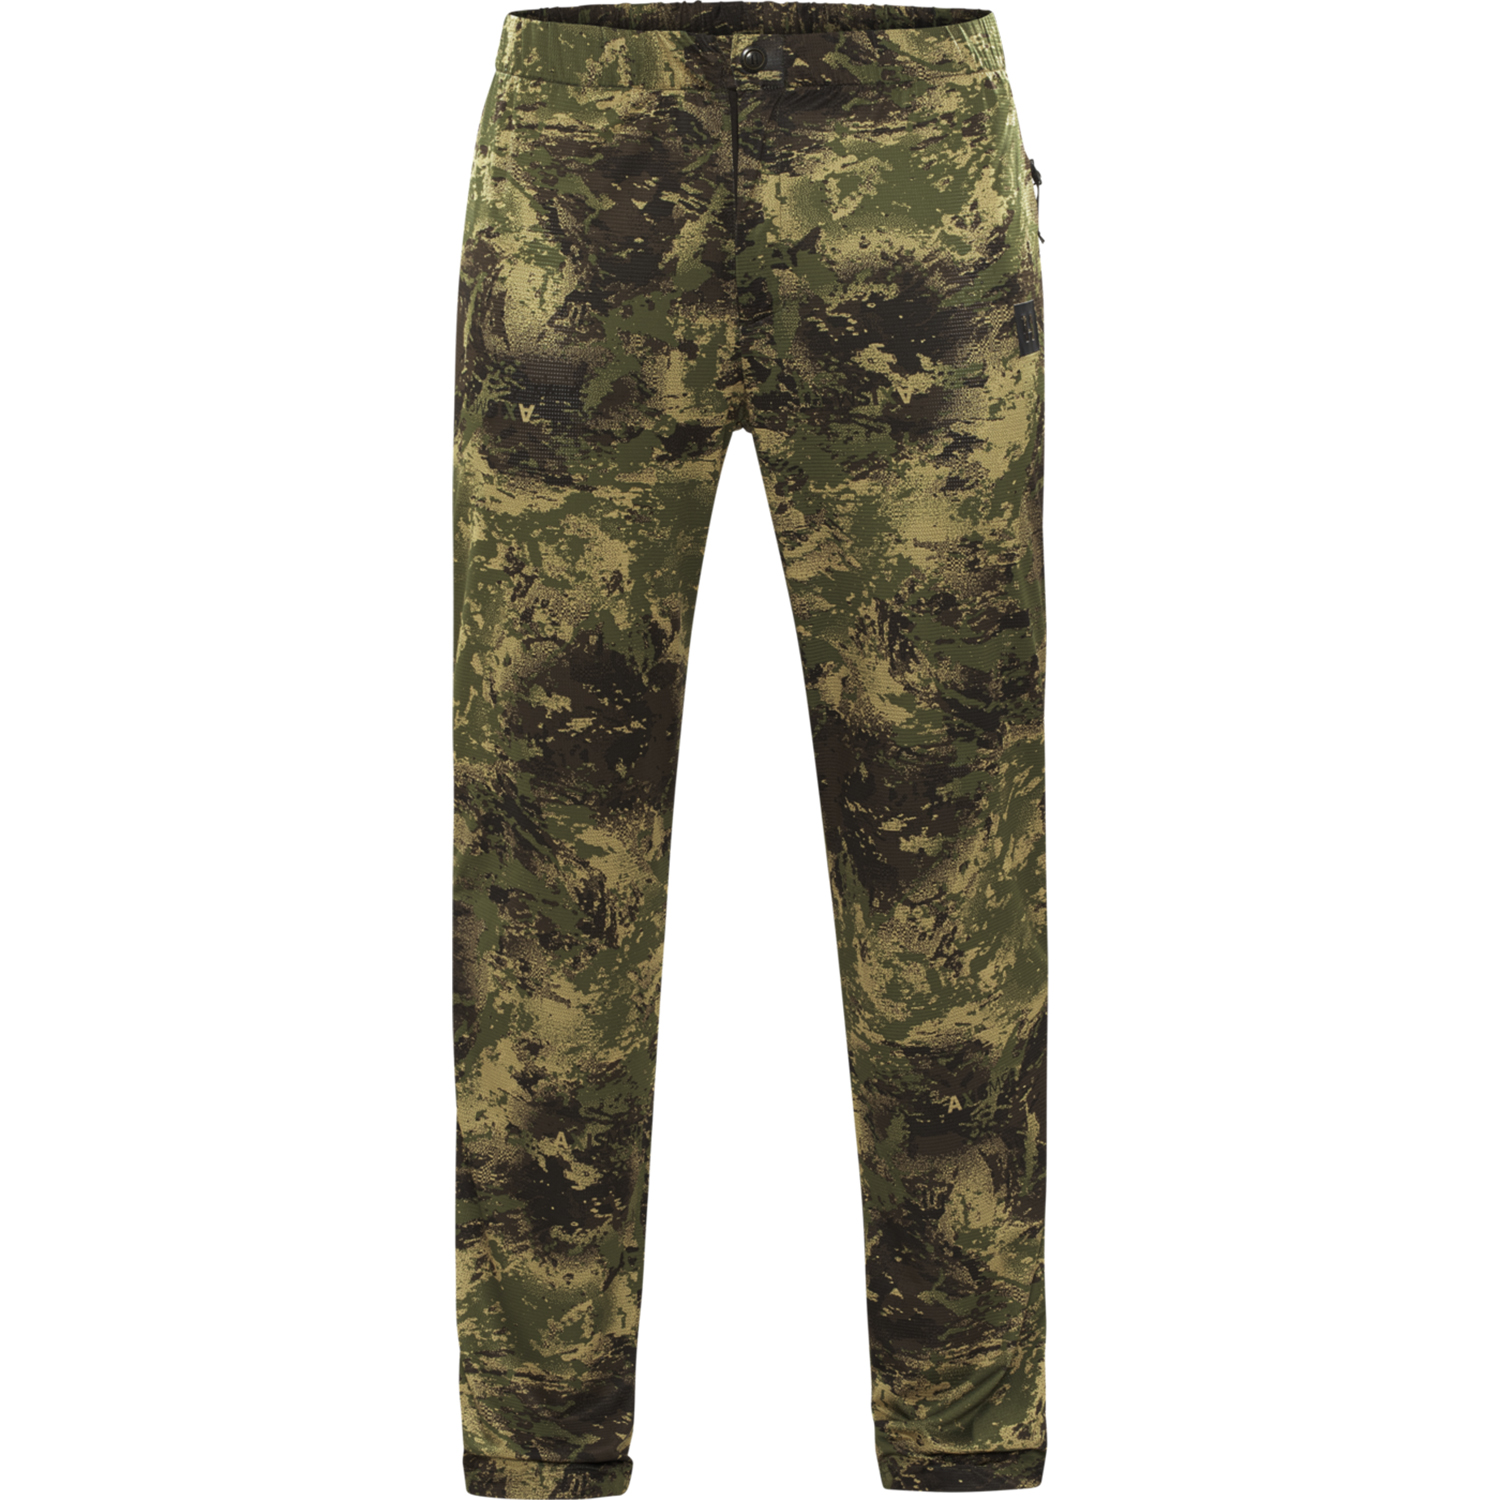 Härkila cover trousers deer stalker (AXIS MSP) - Hunting Clothing